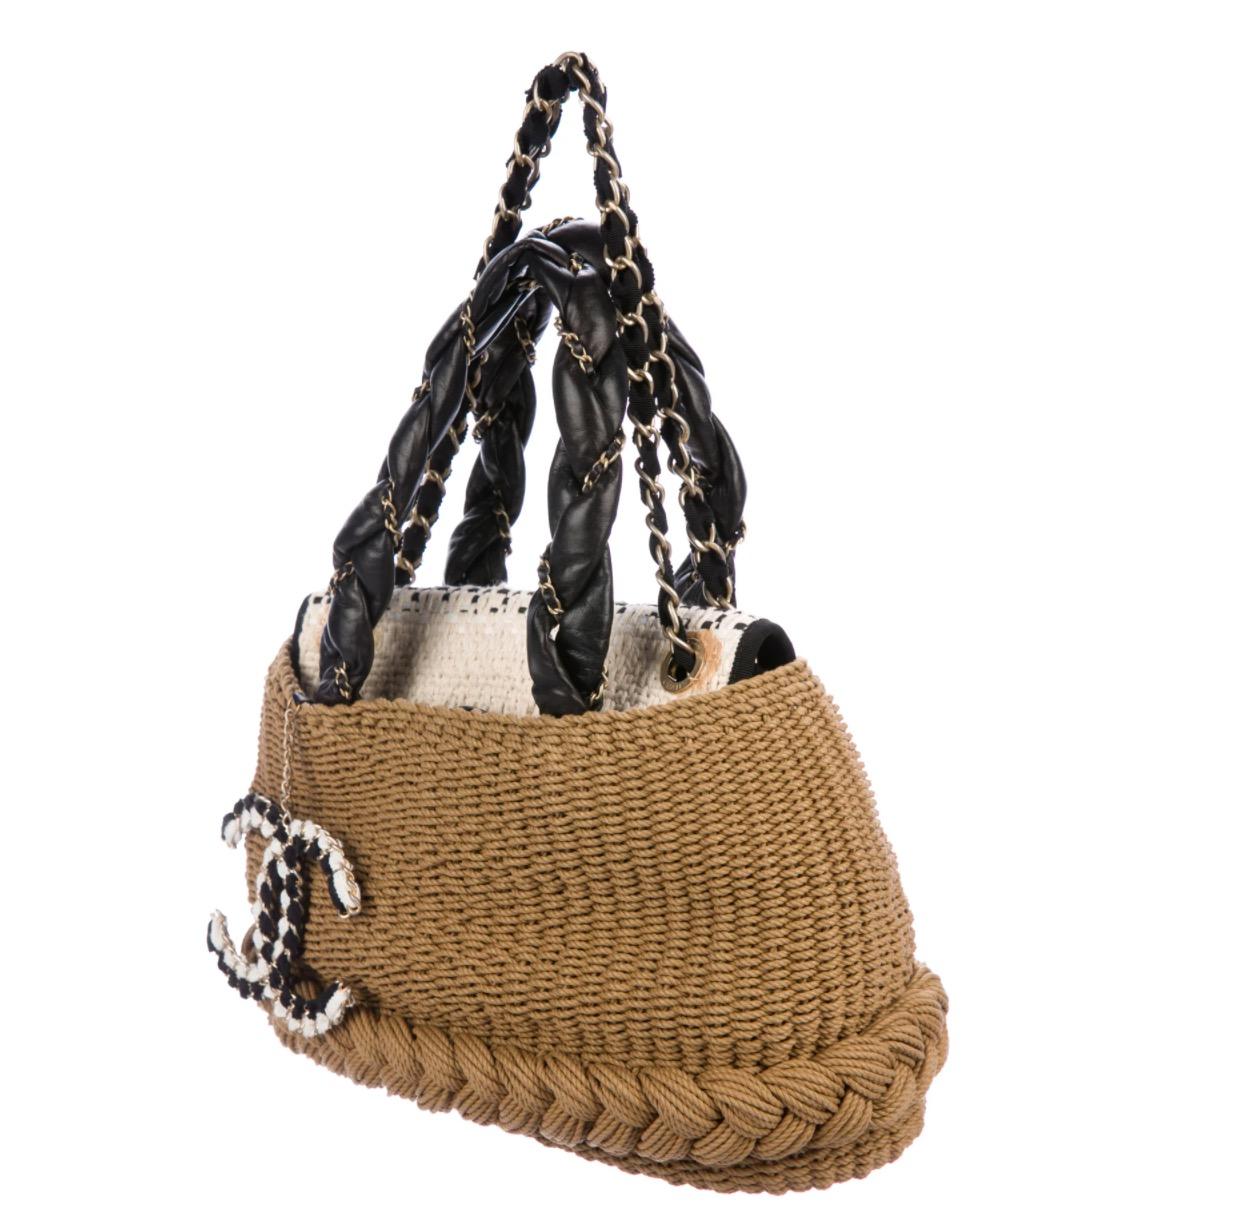 Woven rope 
Straw 
Tweed
Leather
Gold-tone hardware
Grosgrain lining
Magnetic snap closure
Shoulder strap drop 9